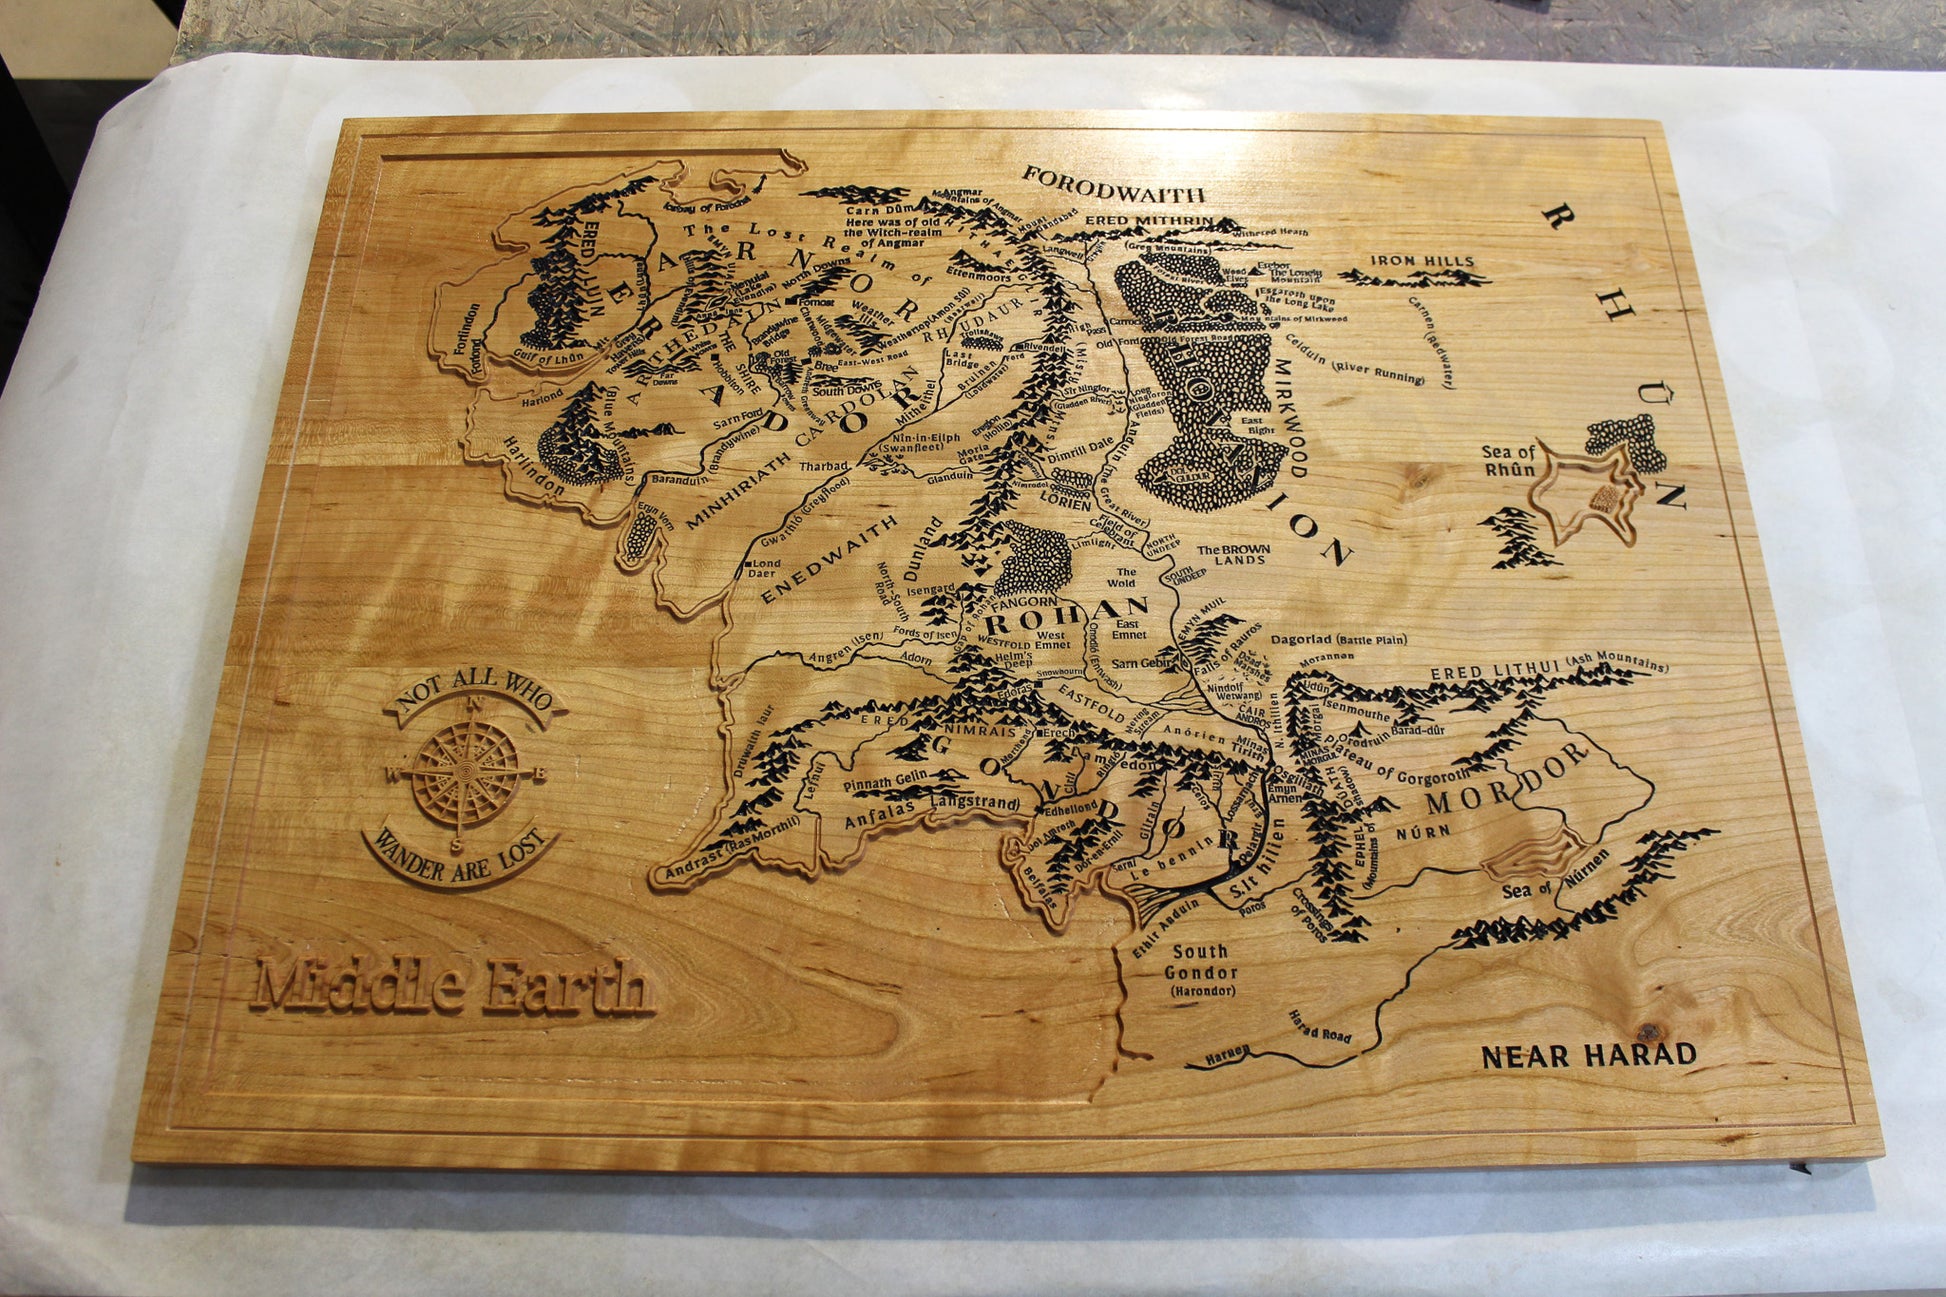 mordor lord of the rings map